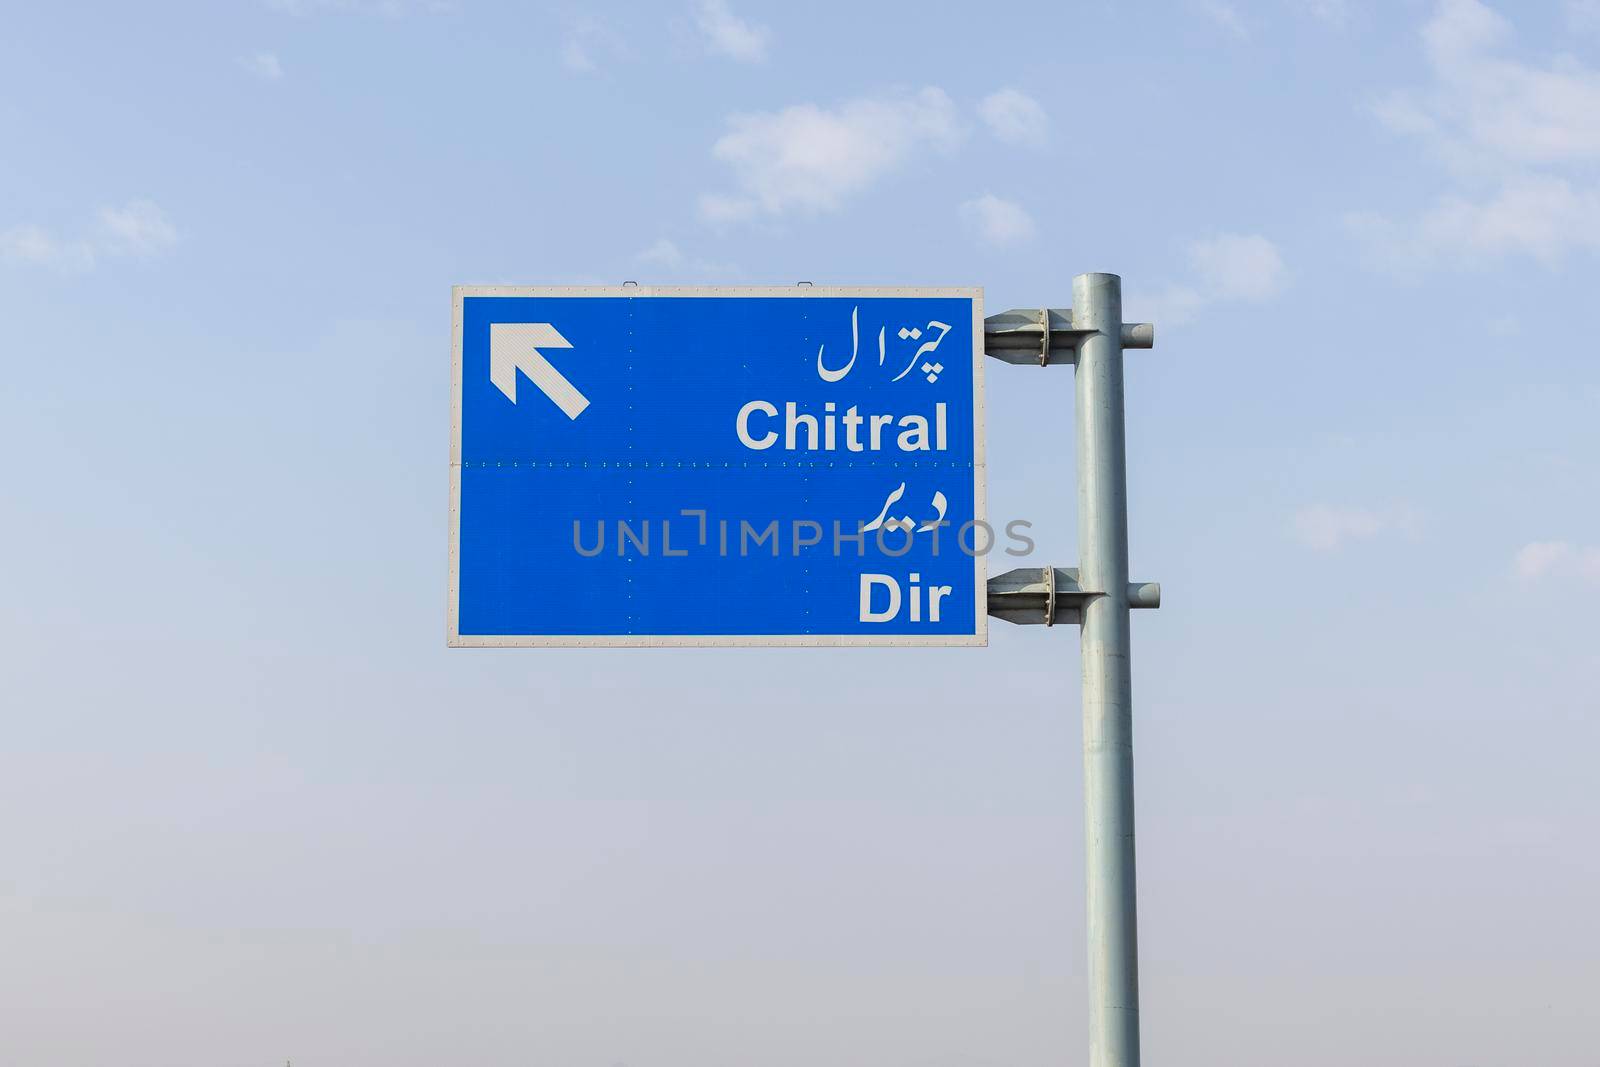 Dir, KPK, Pakistan - March, 7, 2022: Pakistan highway with signs to Dir and Chitral